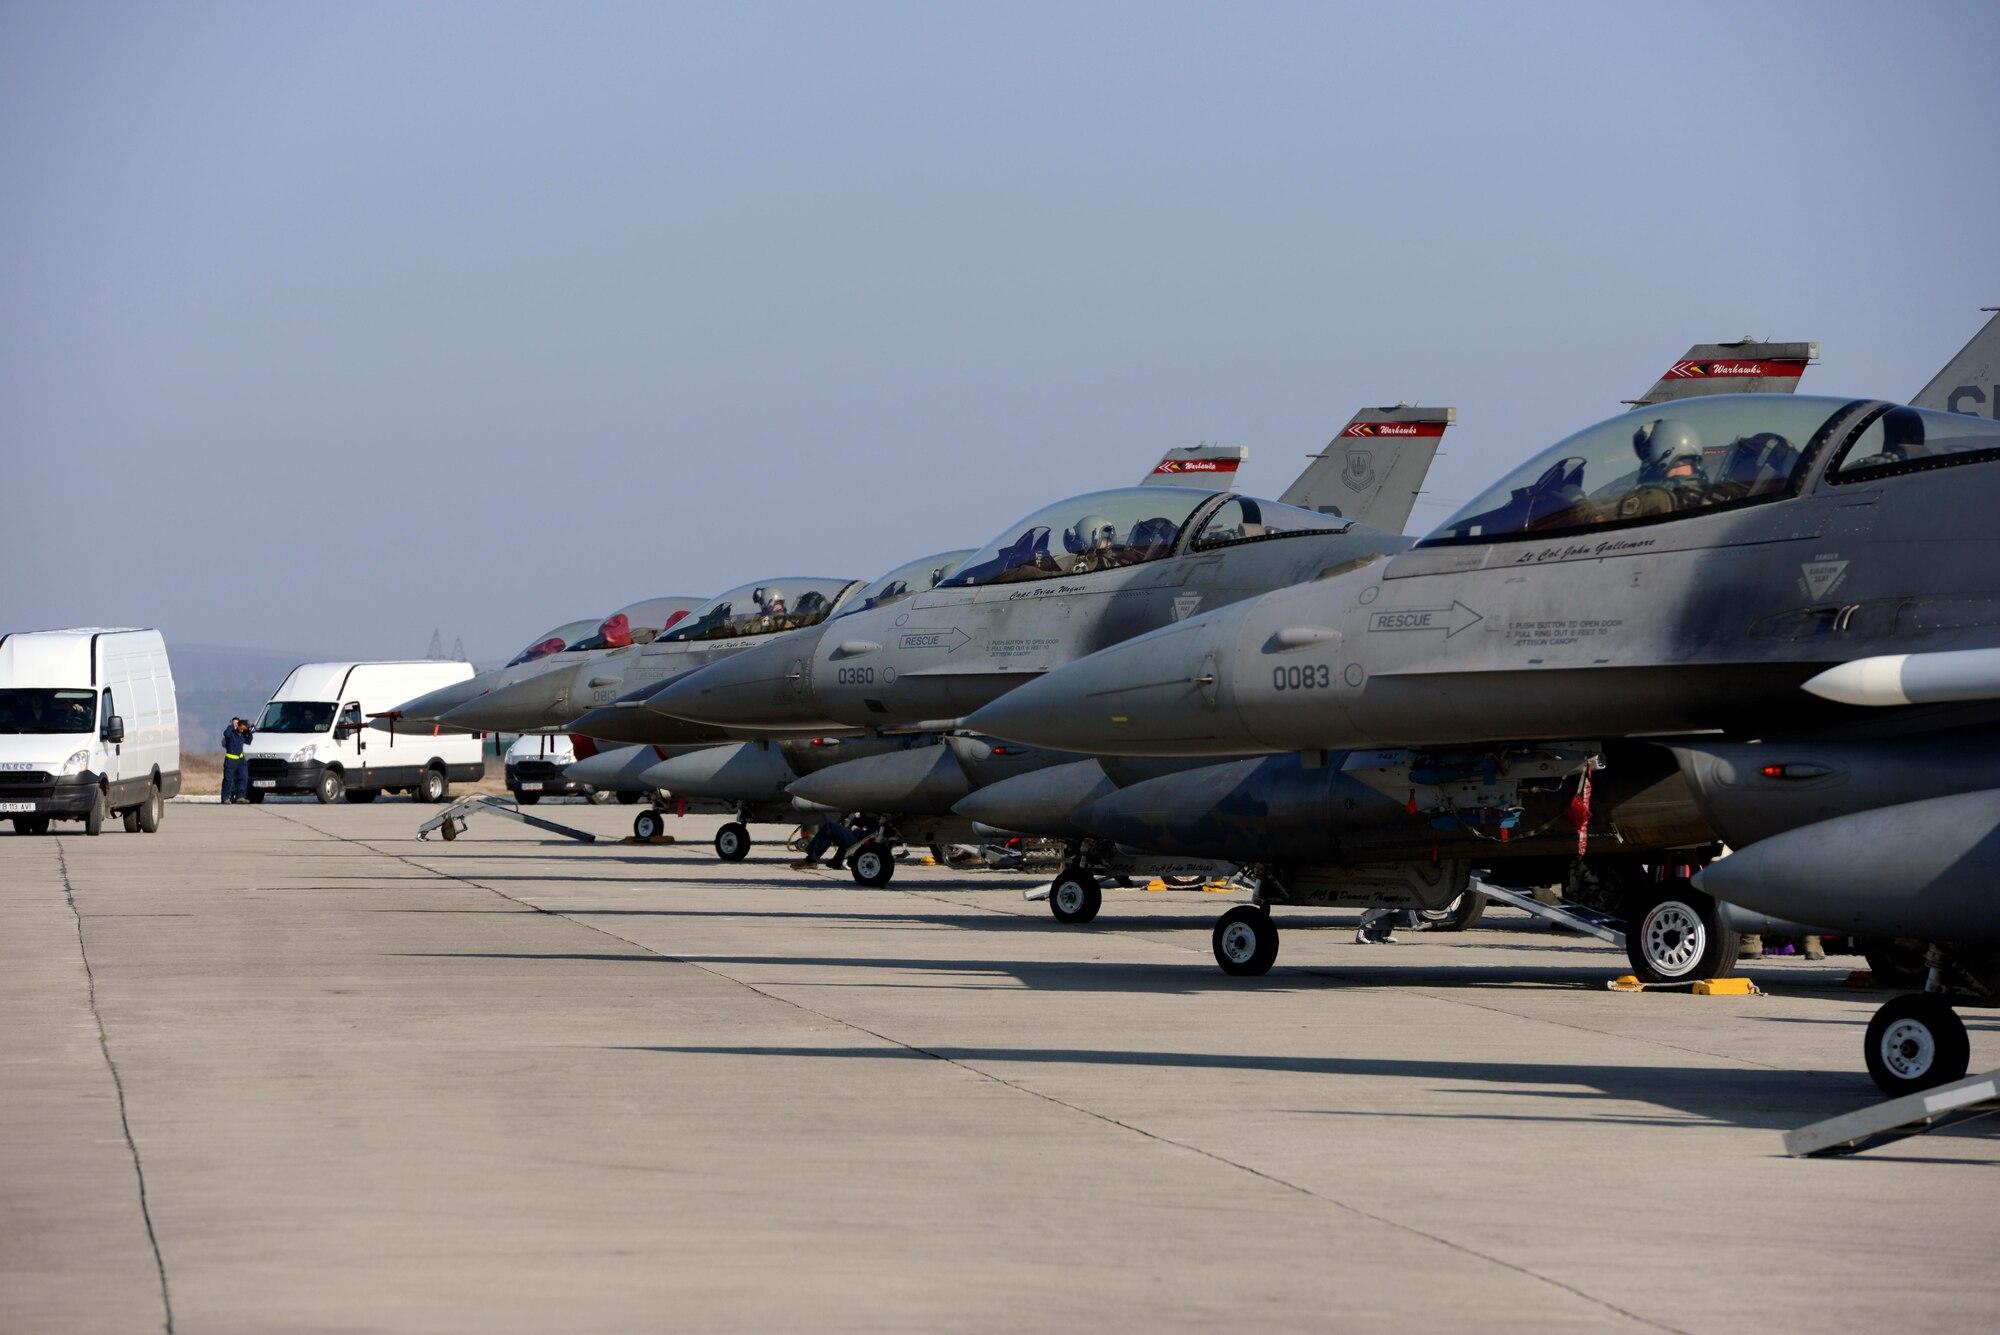 F-16CJ Fighting Falcons are lined up on the flightline for the first sortie of Dacian Warhawk, March 16, 2015, at Campia Turzii, Romania. Dacian Warhawk is a two-week long training mission designed to increase the interoperability between the U.S. and Romania. The training mission incorporated both ground and Air operations. The F-16s are assigned to the 480th Fighter Squadron. (U.S. Air Force photo/Staff Sgt. Kris Levasseur)